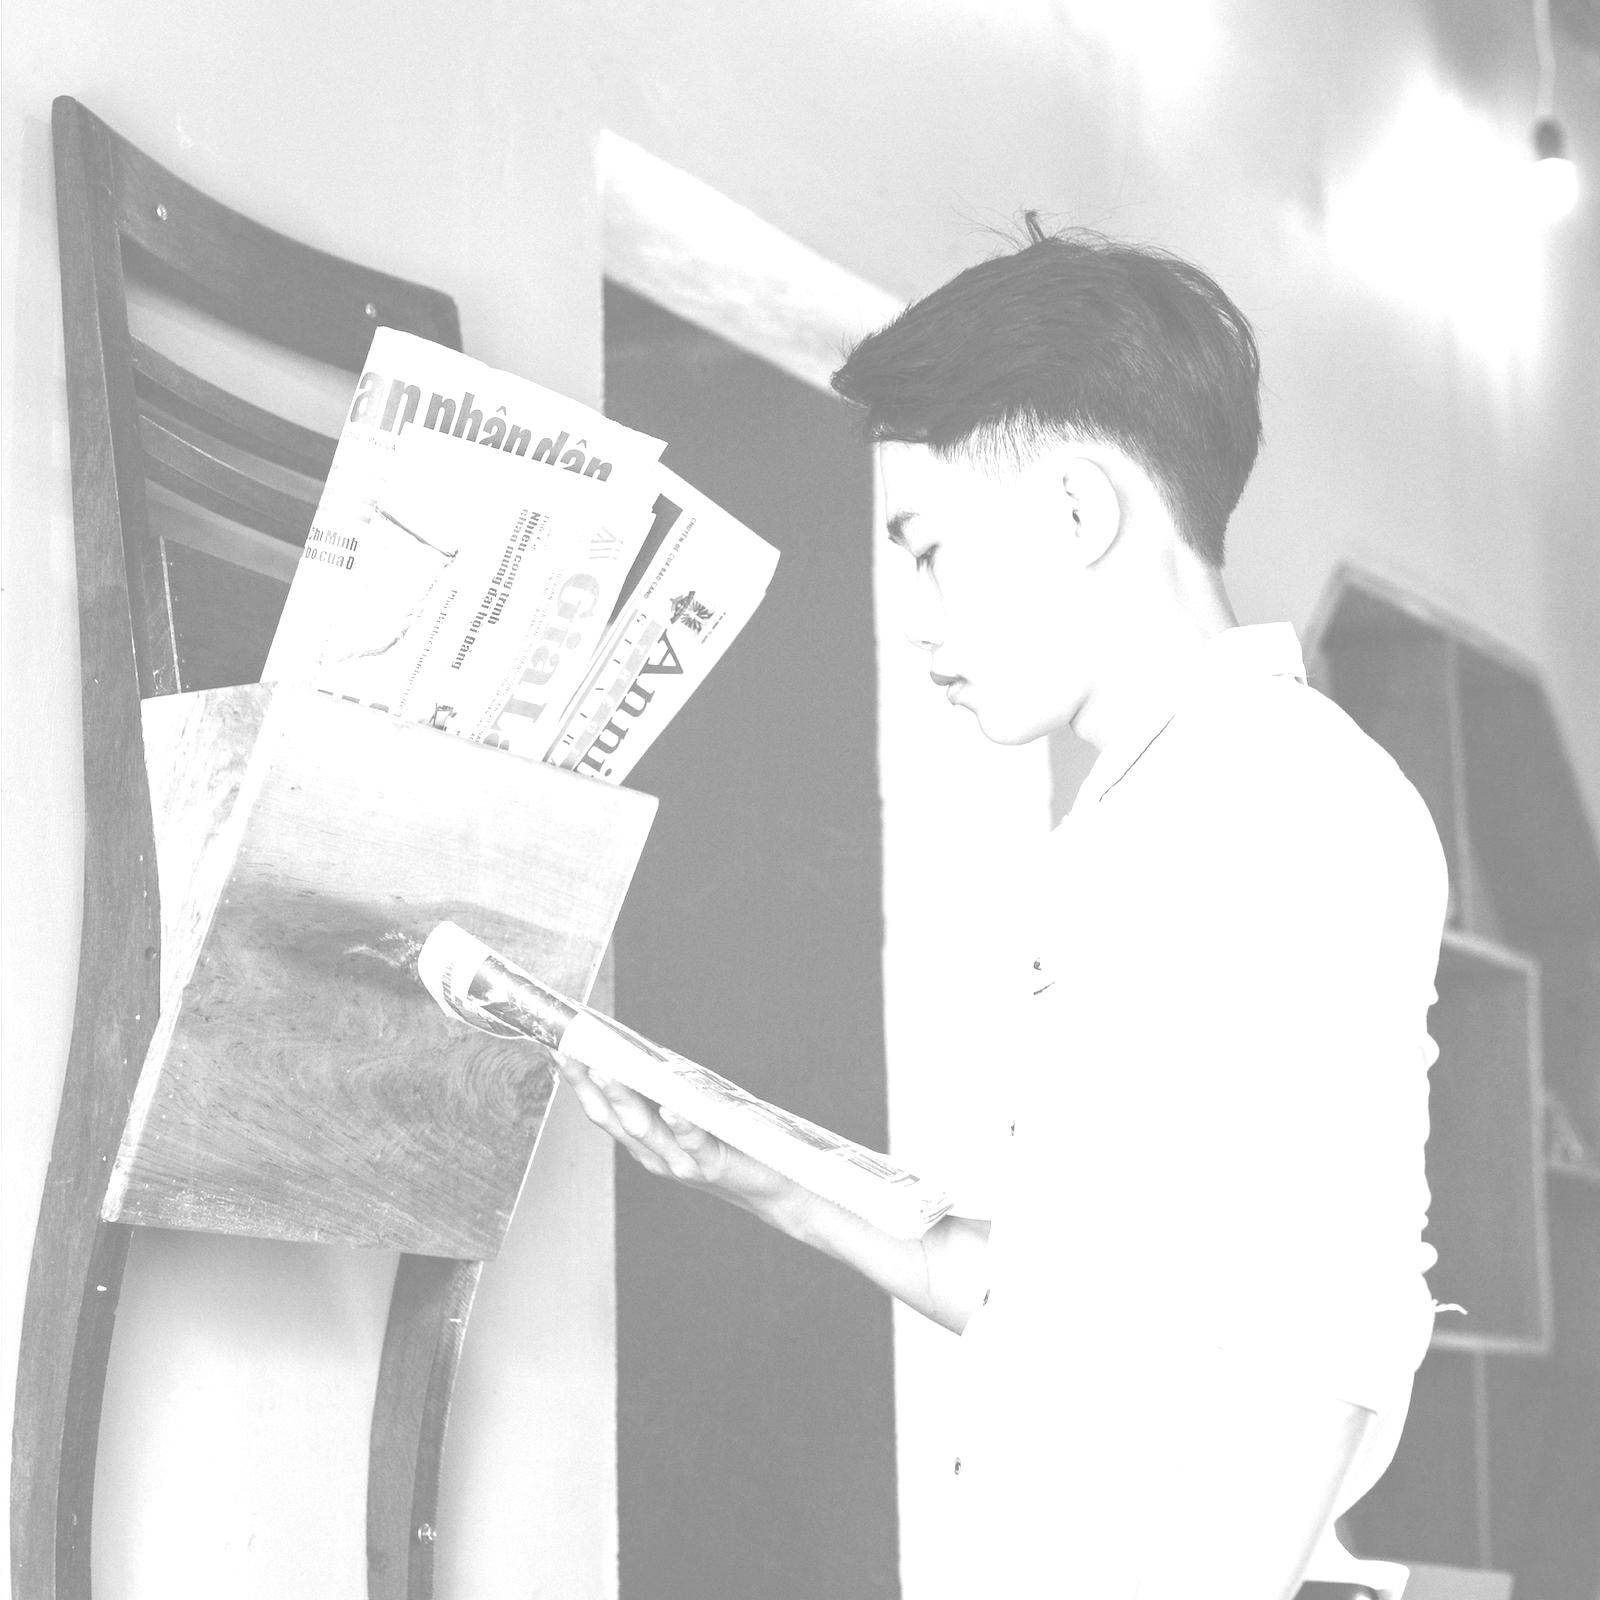 Young man reading newspaper.